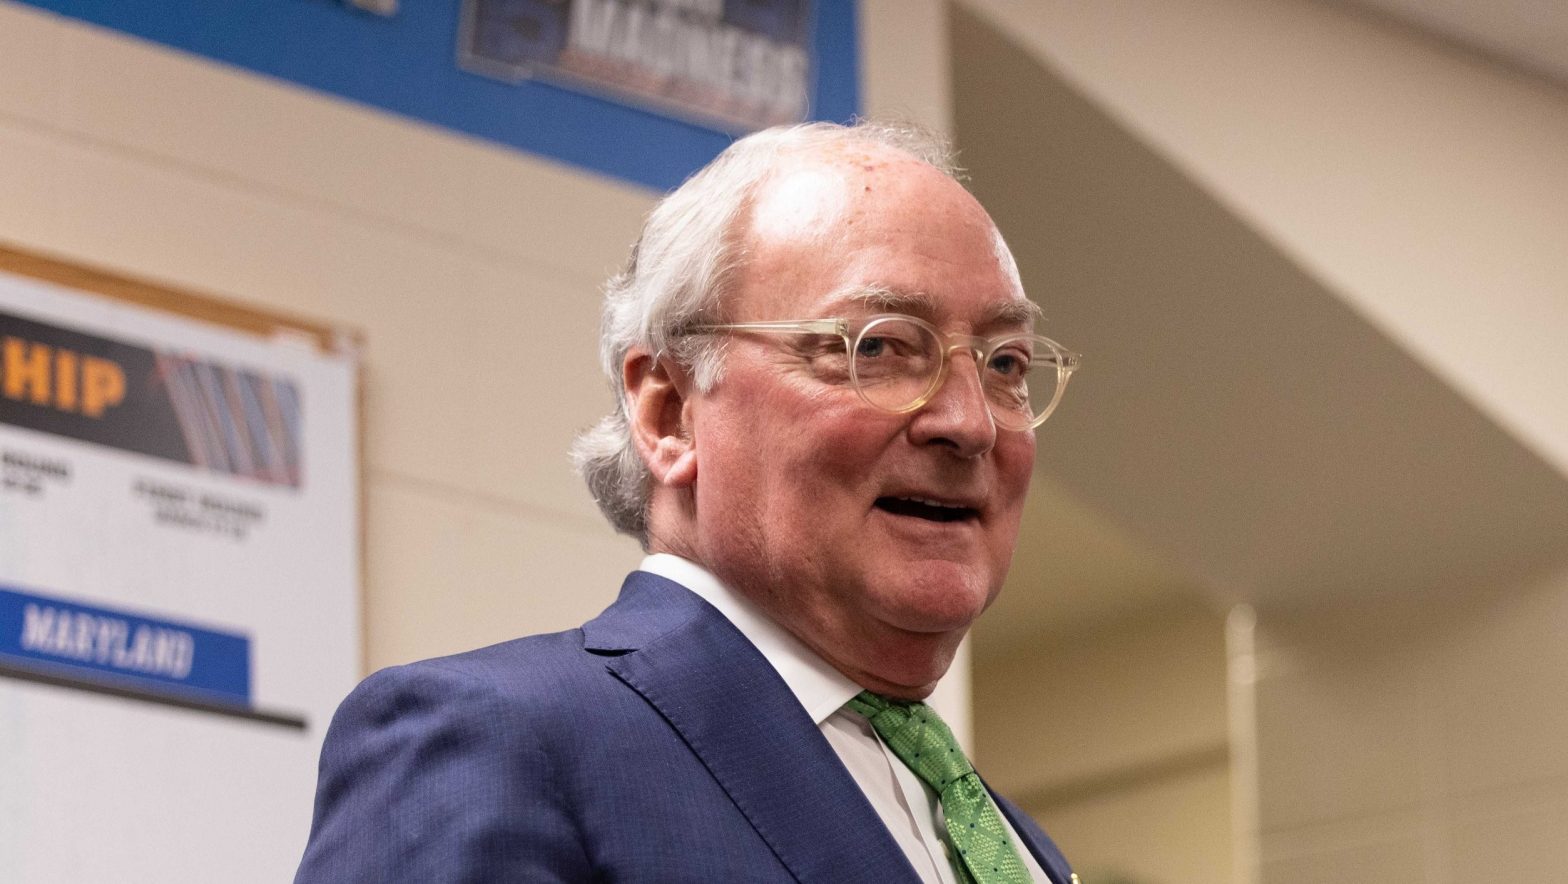 Jack Swarbrick: Net worth, age, relationship, career, family and more